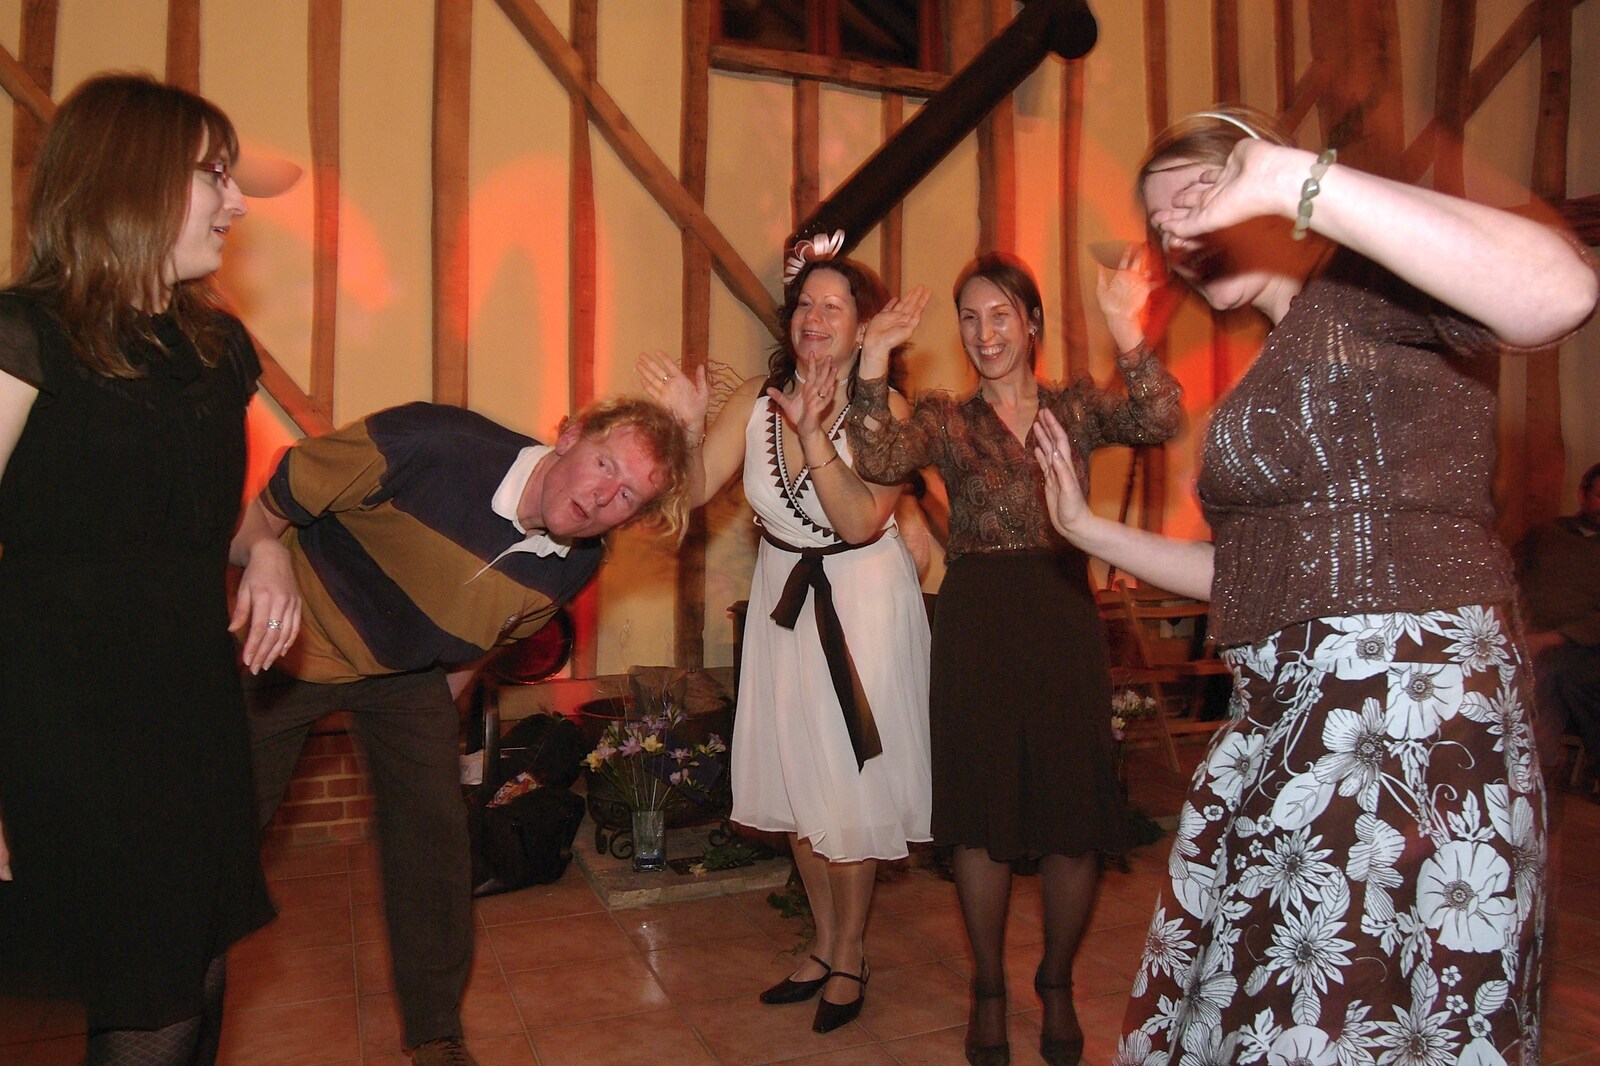 Hands in the air from Gov and Rachel's Wedding, Thorndon, Suffolk - 2nd February 2008